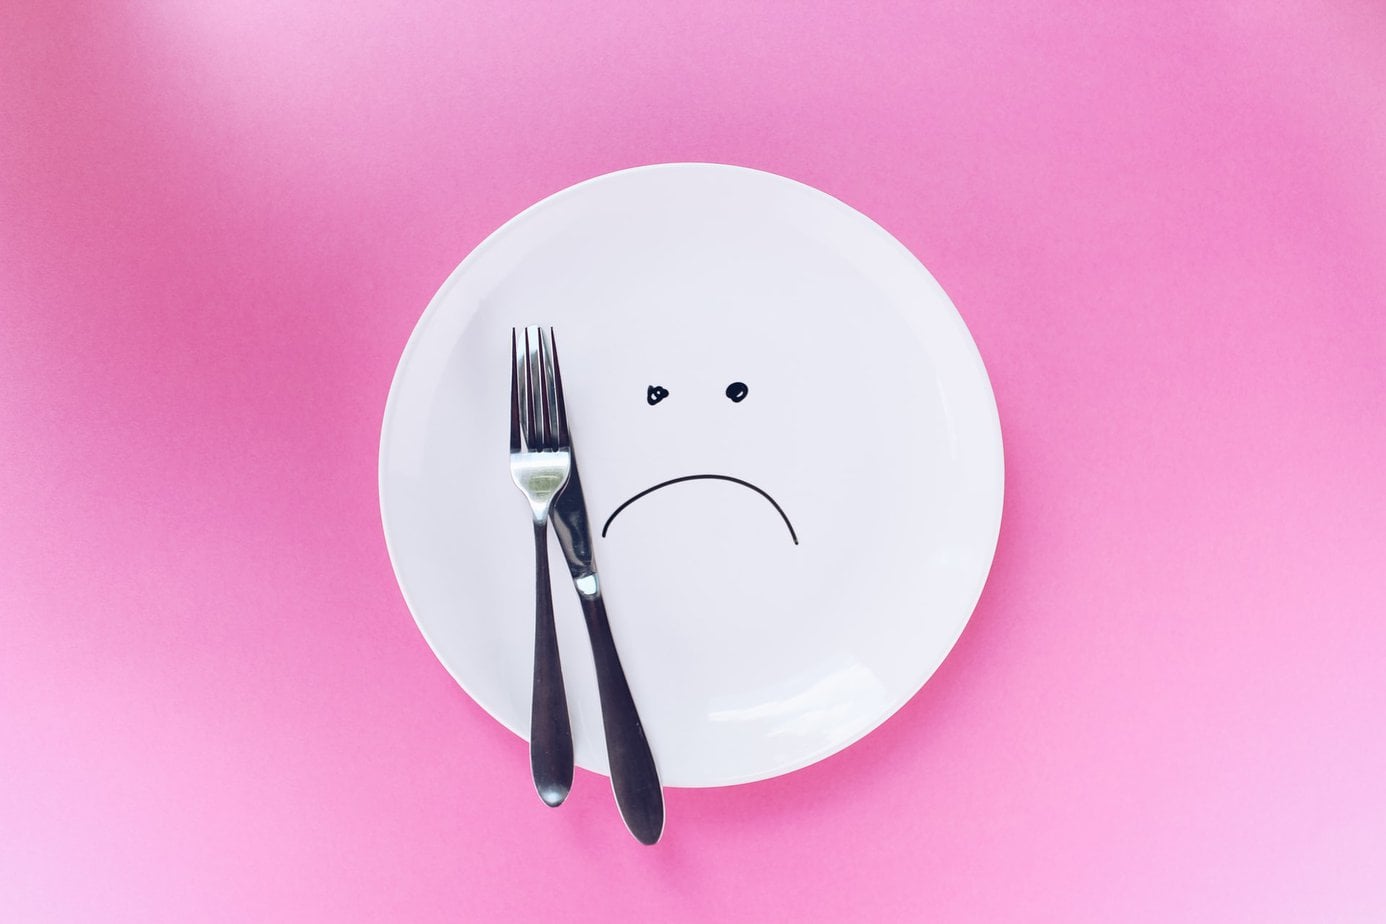 The 10 most common dietary mistakes that cause weight gain